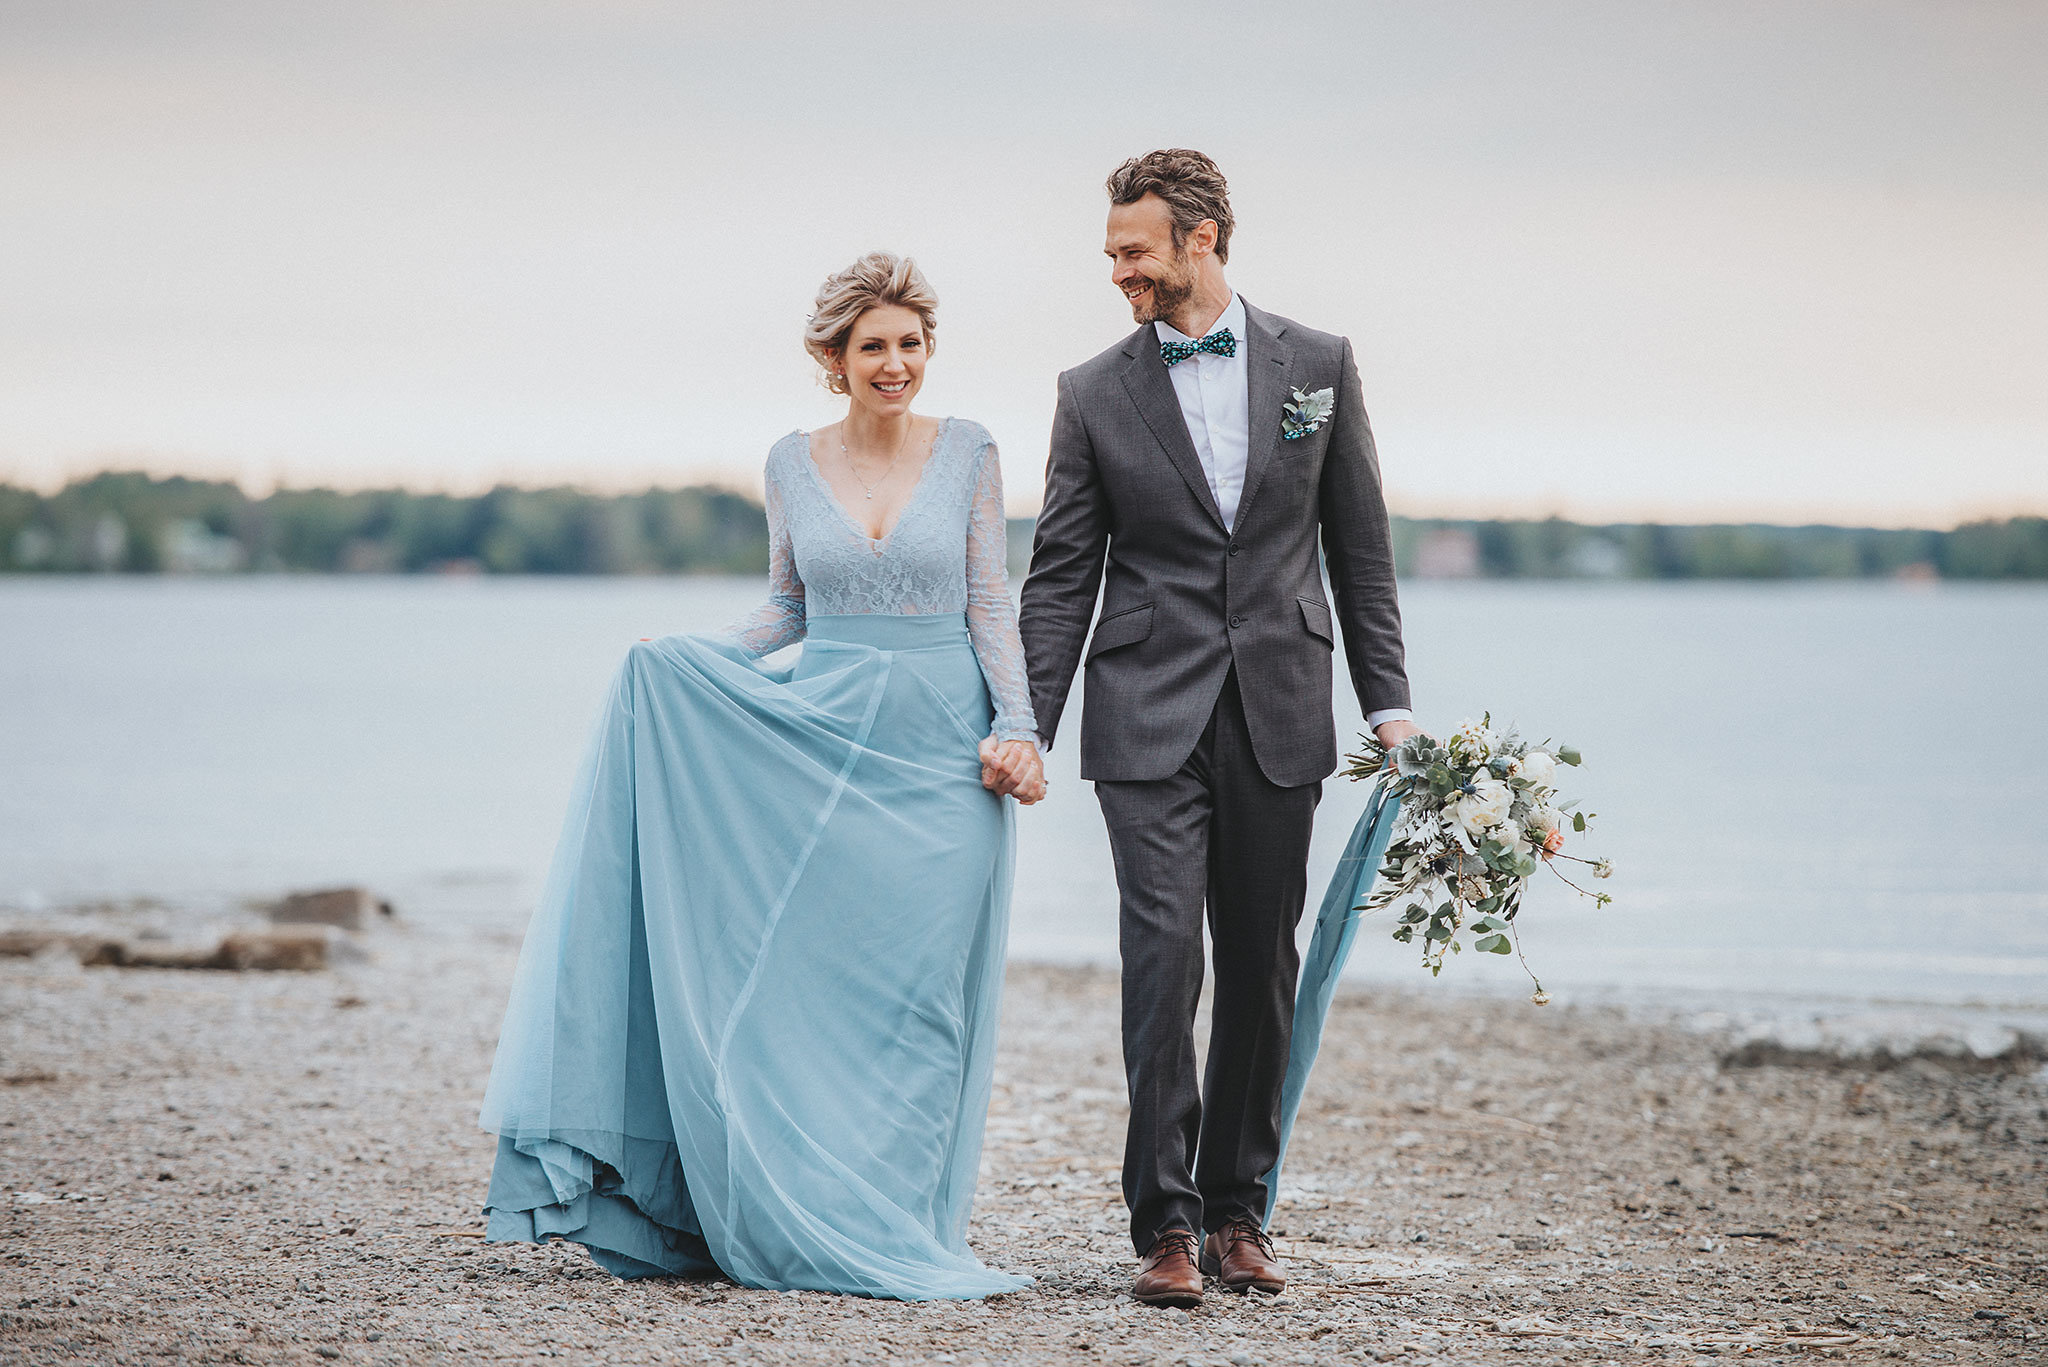 Stormy Scandinavian Wedding Inspiration Featuring a Dramatic Blue Gown | Snowflake Photo 1